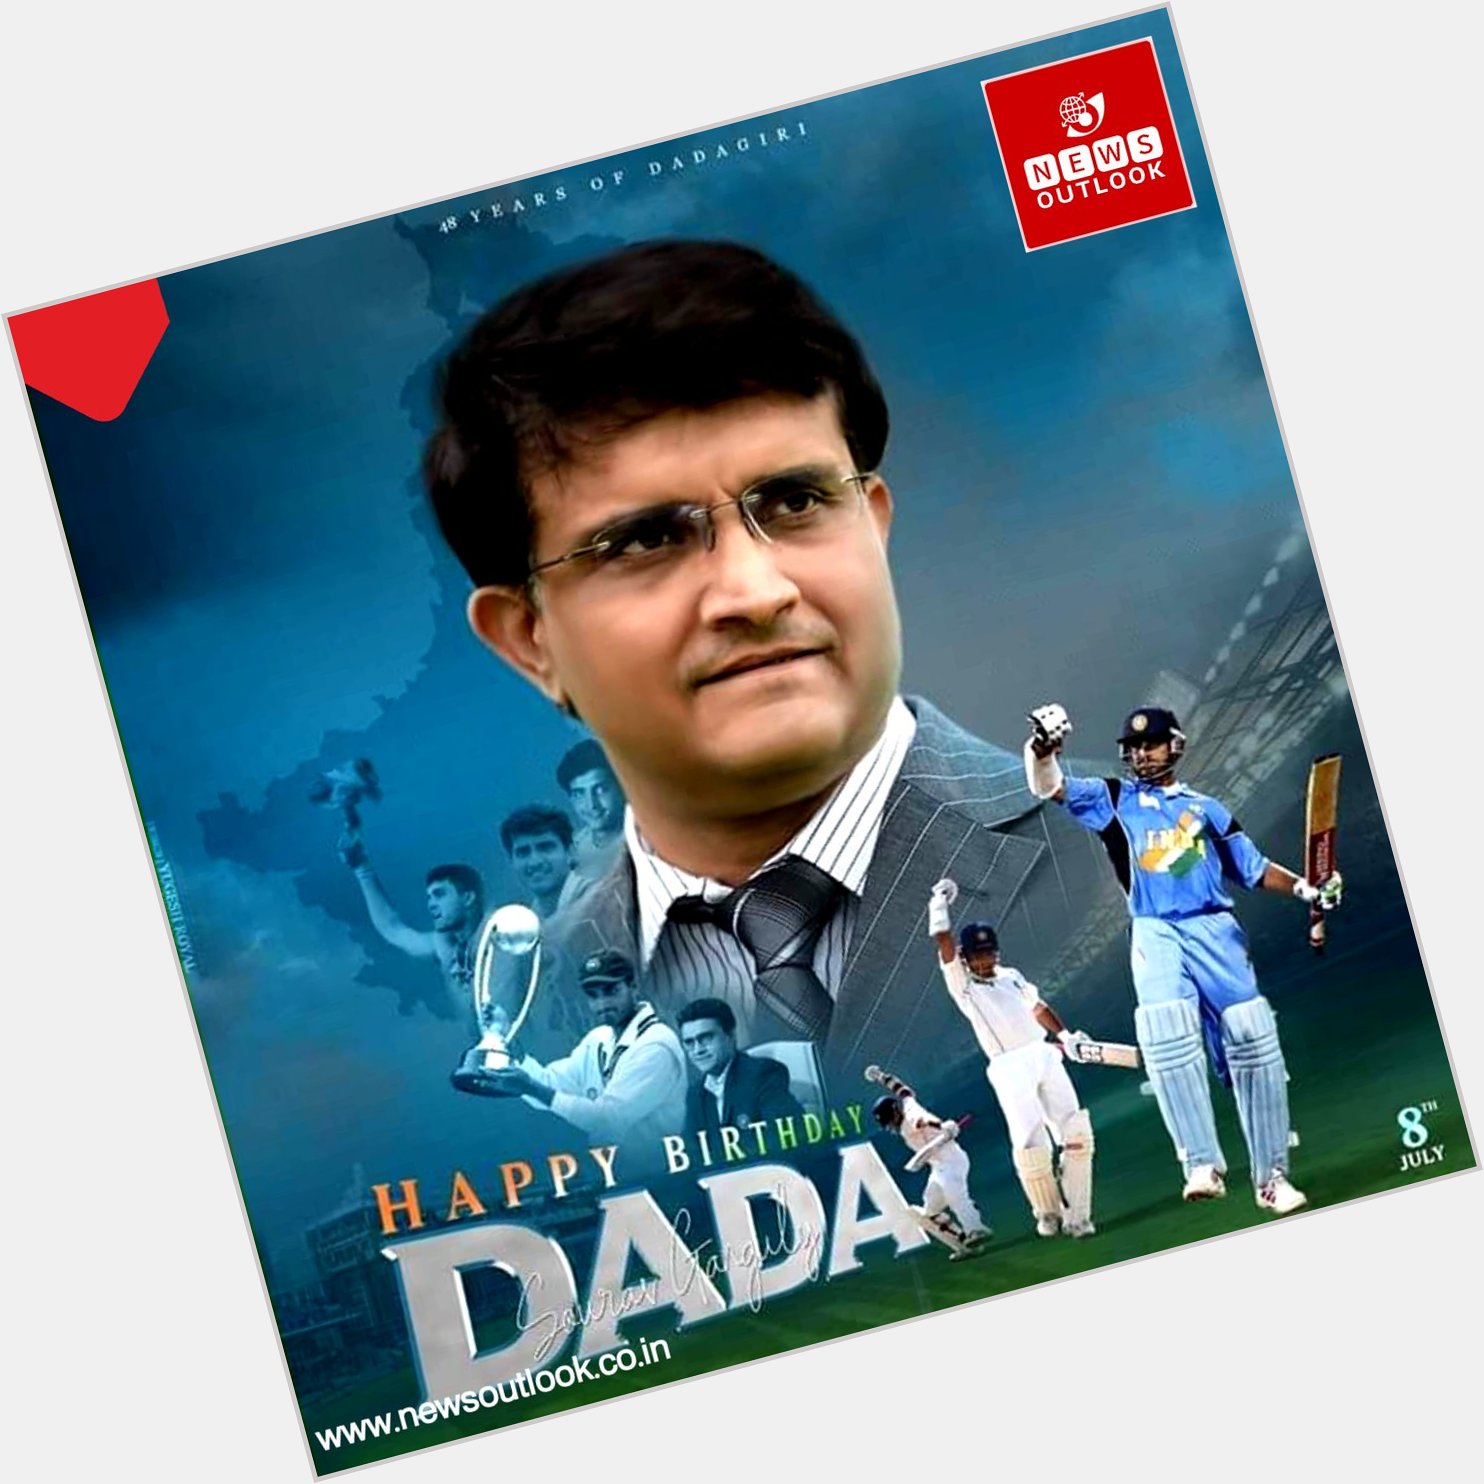   to the cricketer Saurav Ganguly.     